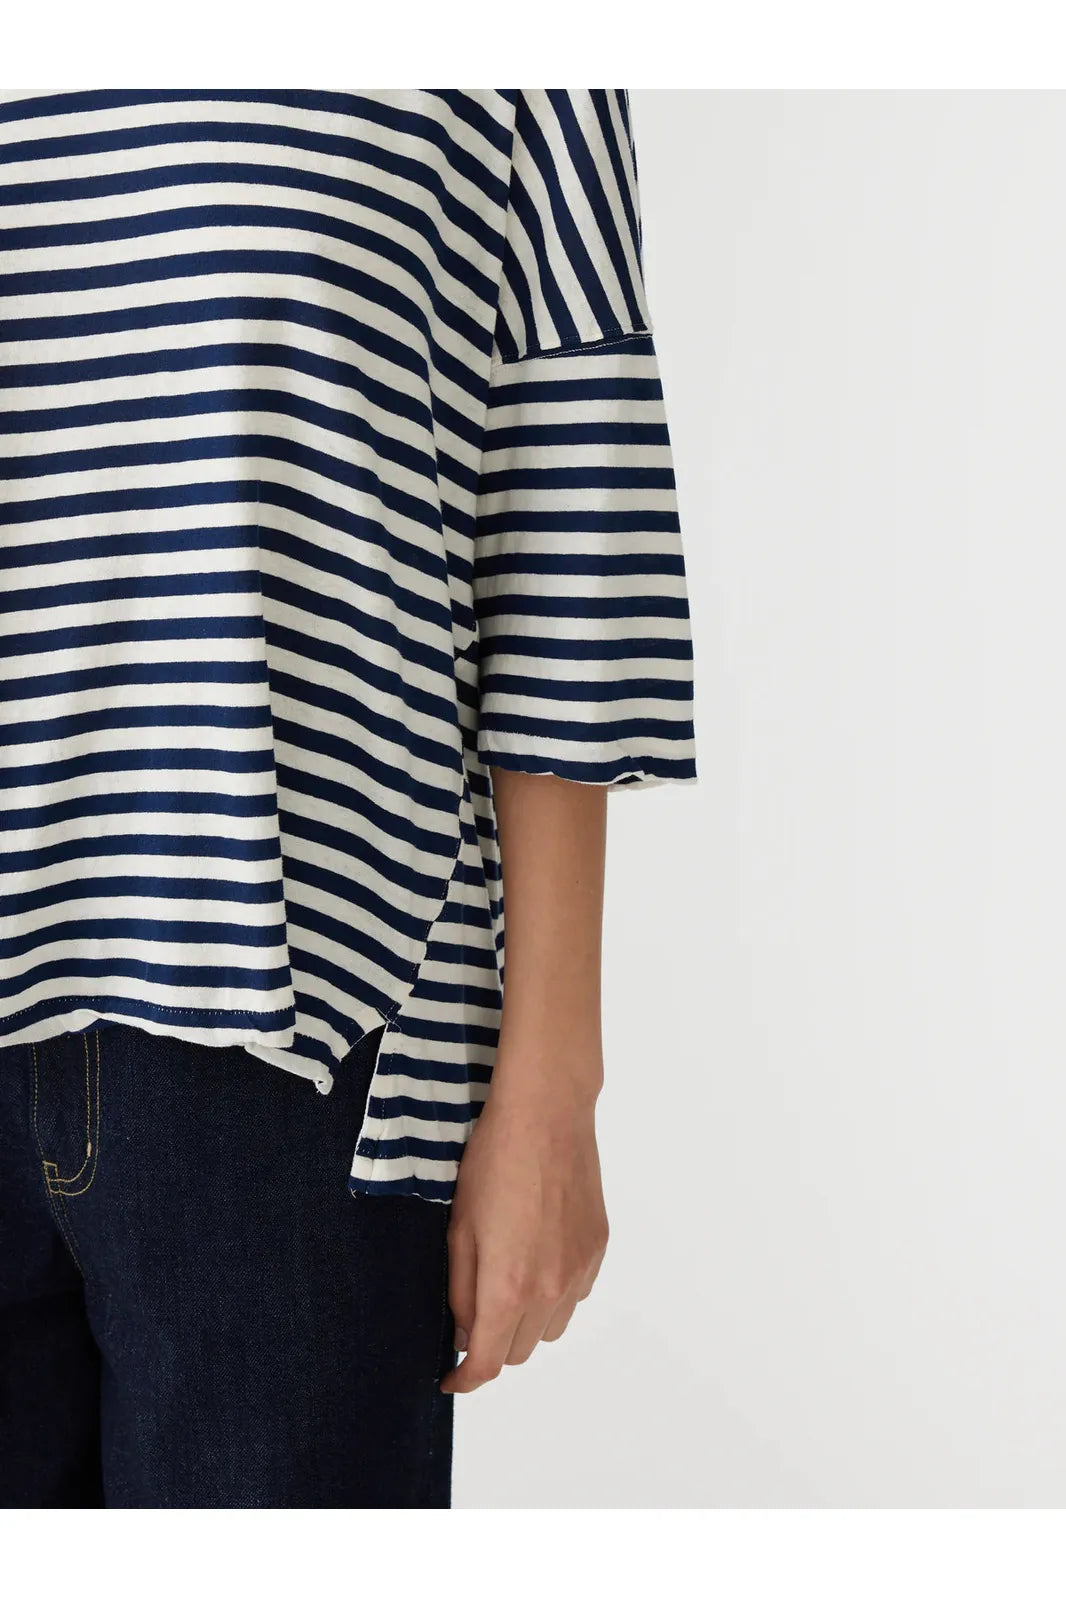 Stripe Side Step Short Sleeve Tshirt in Navy/Undyed by Bassike